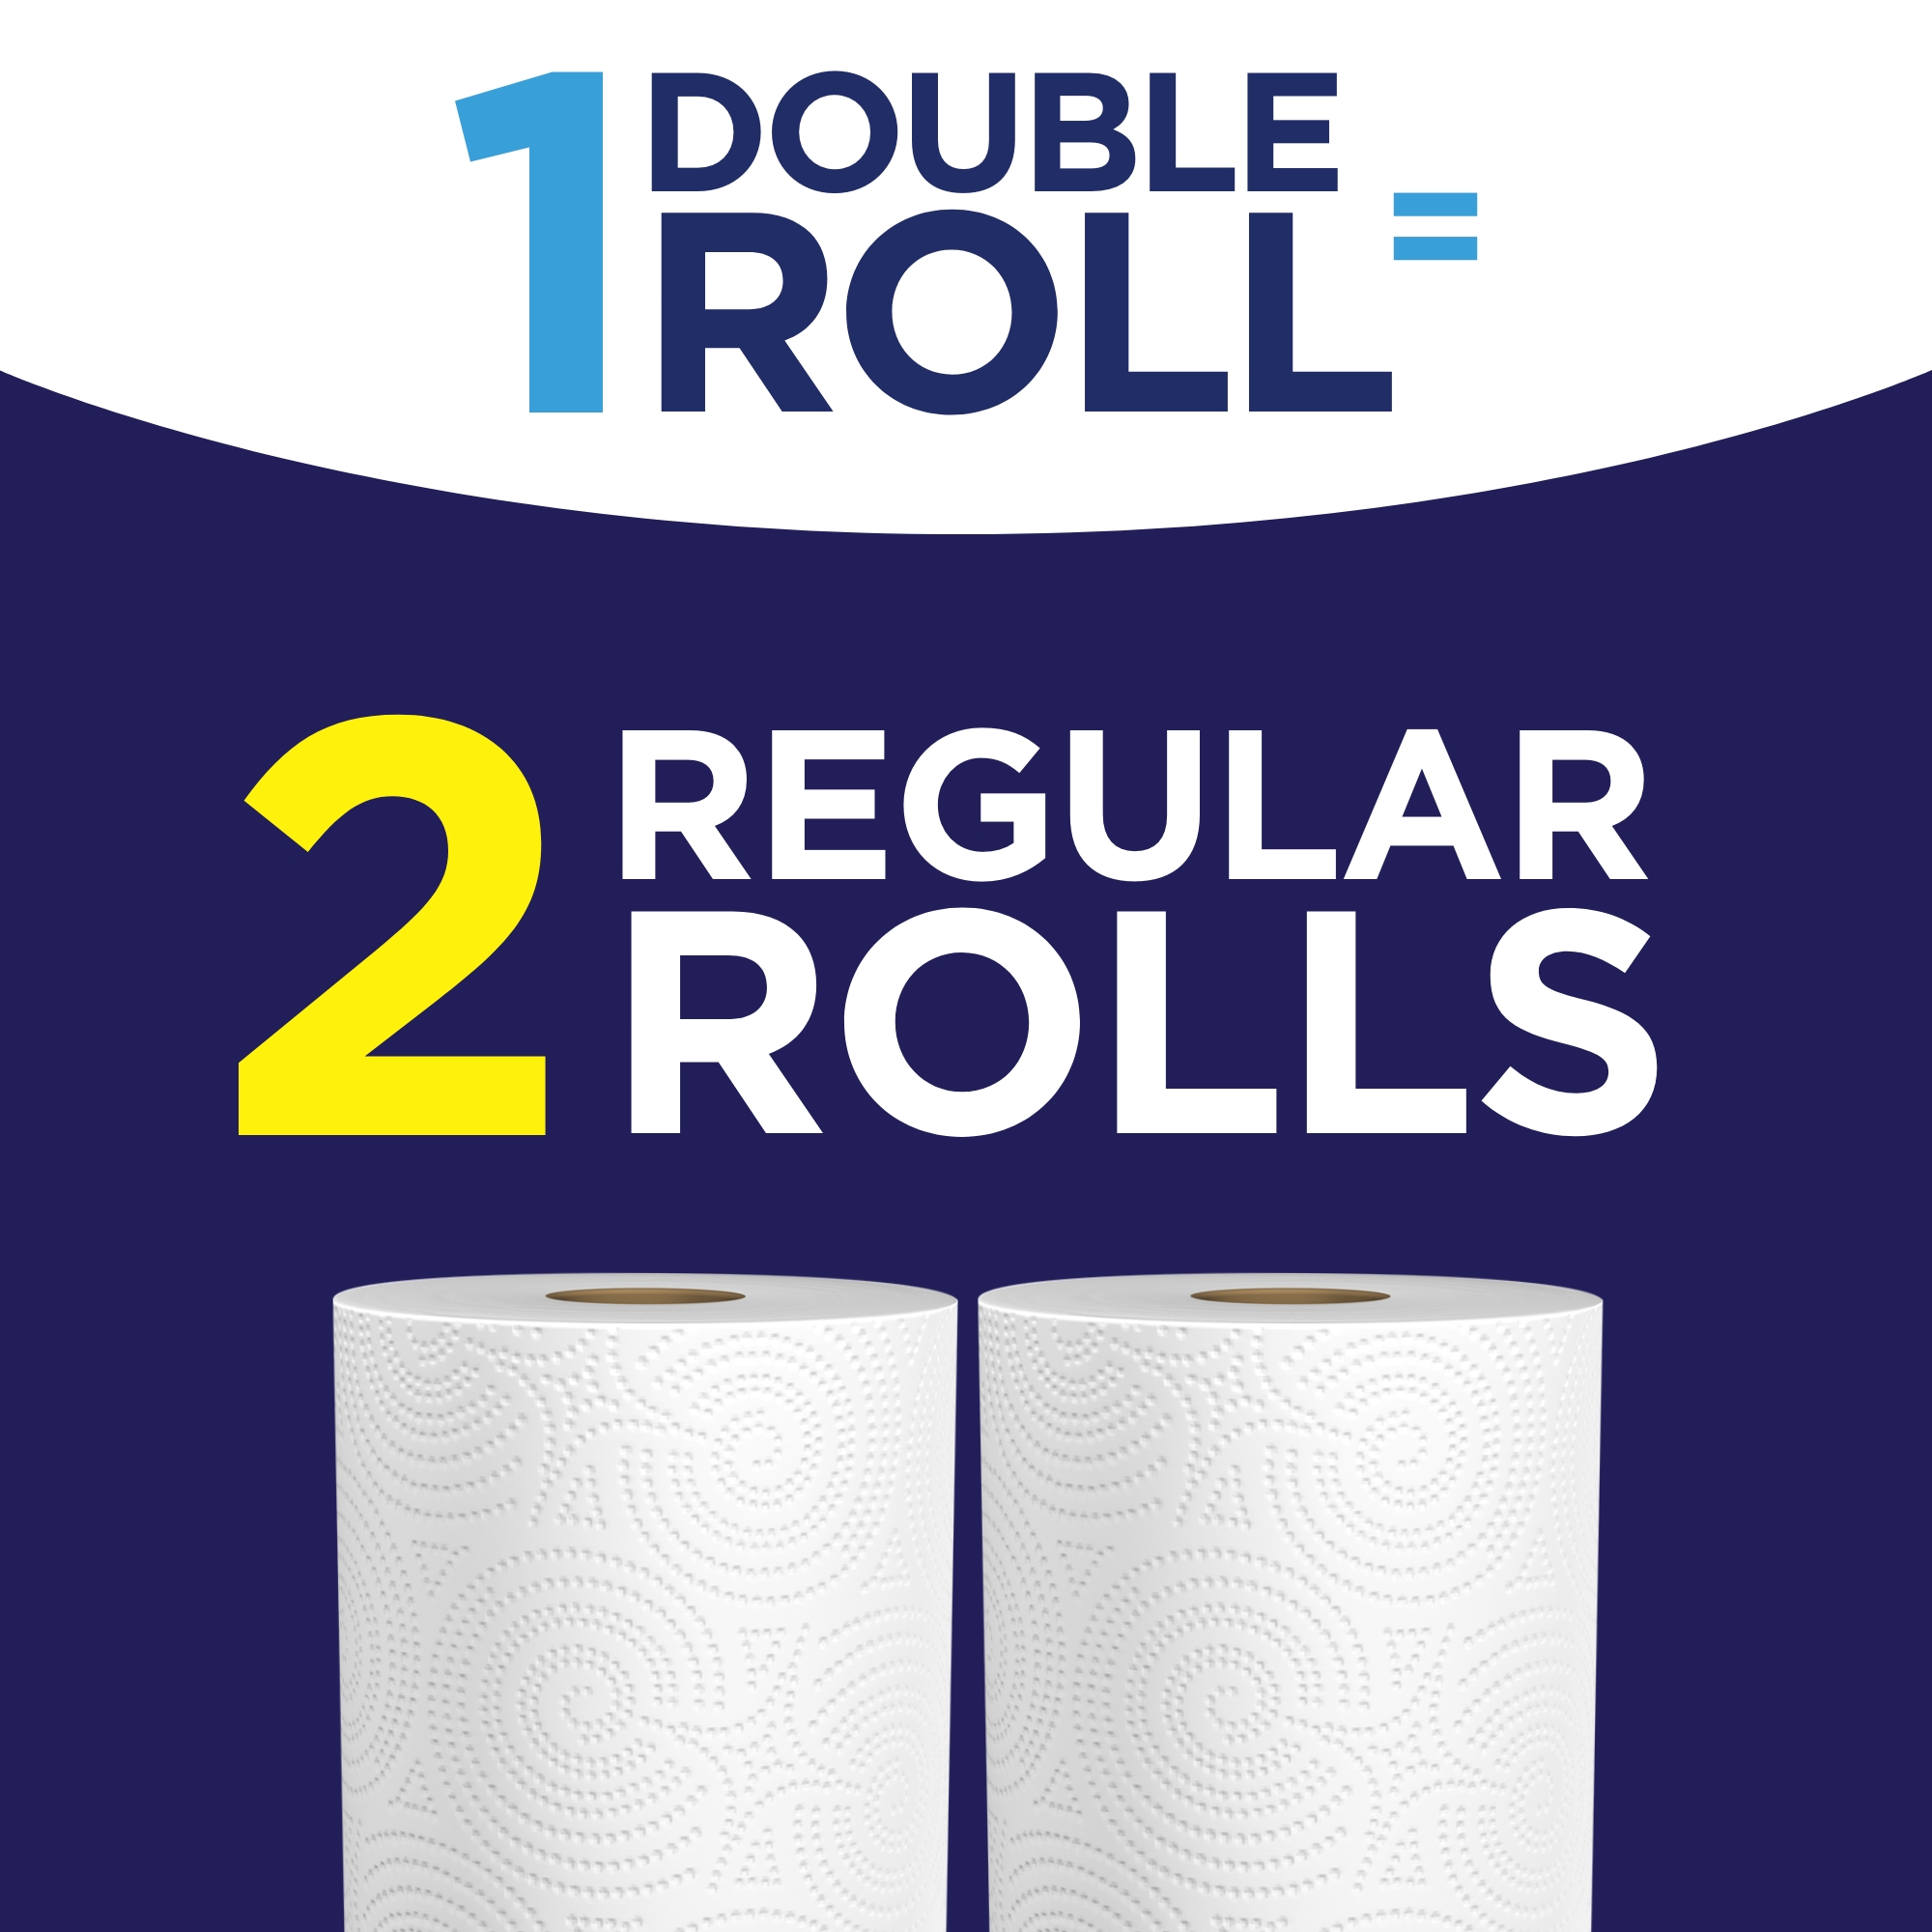 Sparkle Pick-A-Size Paper Towels, White, 4 Double Rolls = 8 Regular Rolls, 126 2-Ply Sheets Per Roll - image 2 of 17